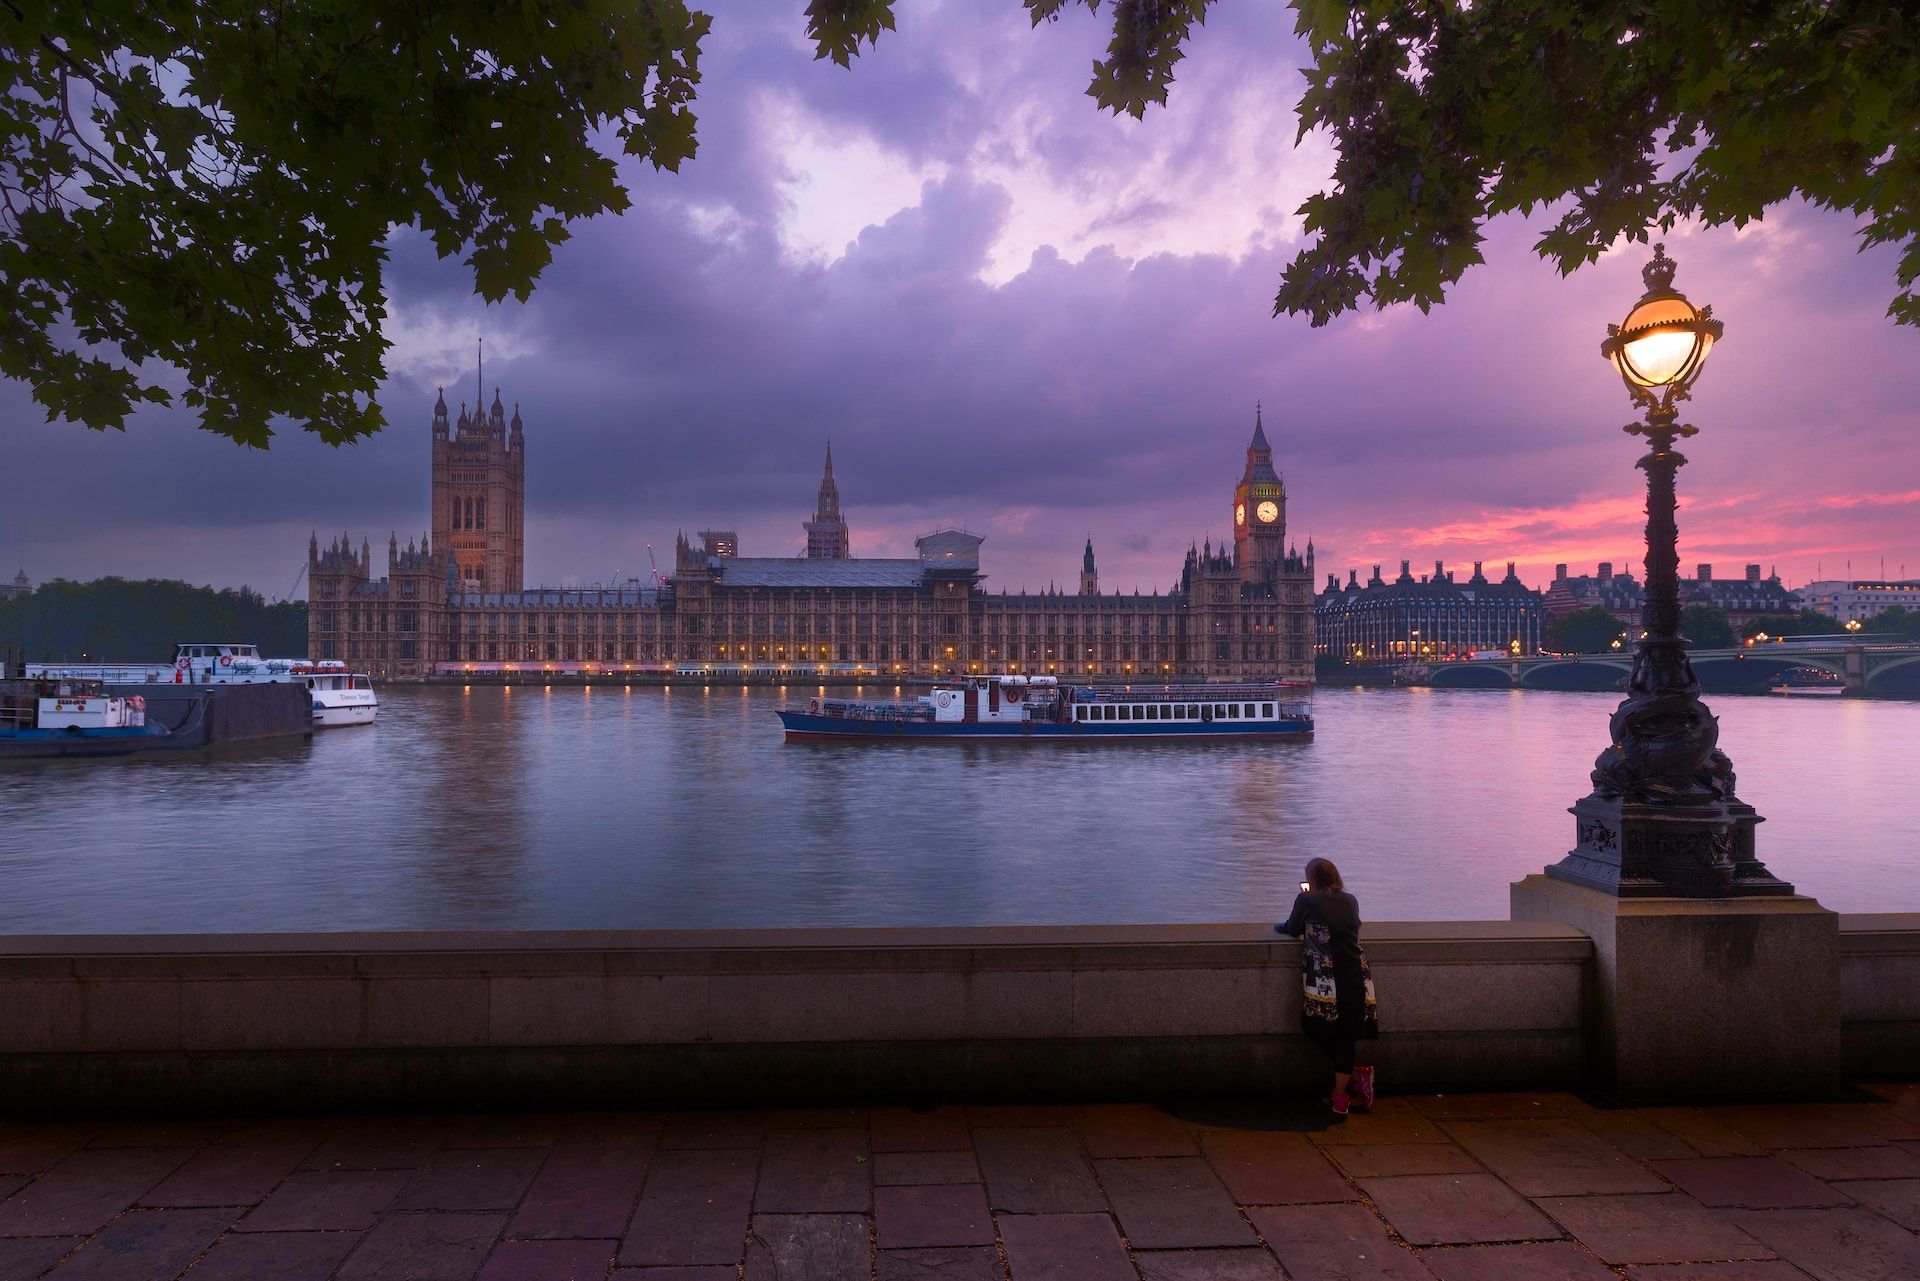 A serene view of London and the River Thames.